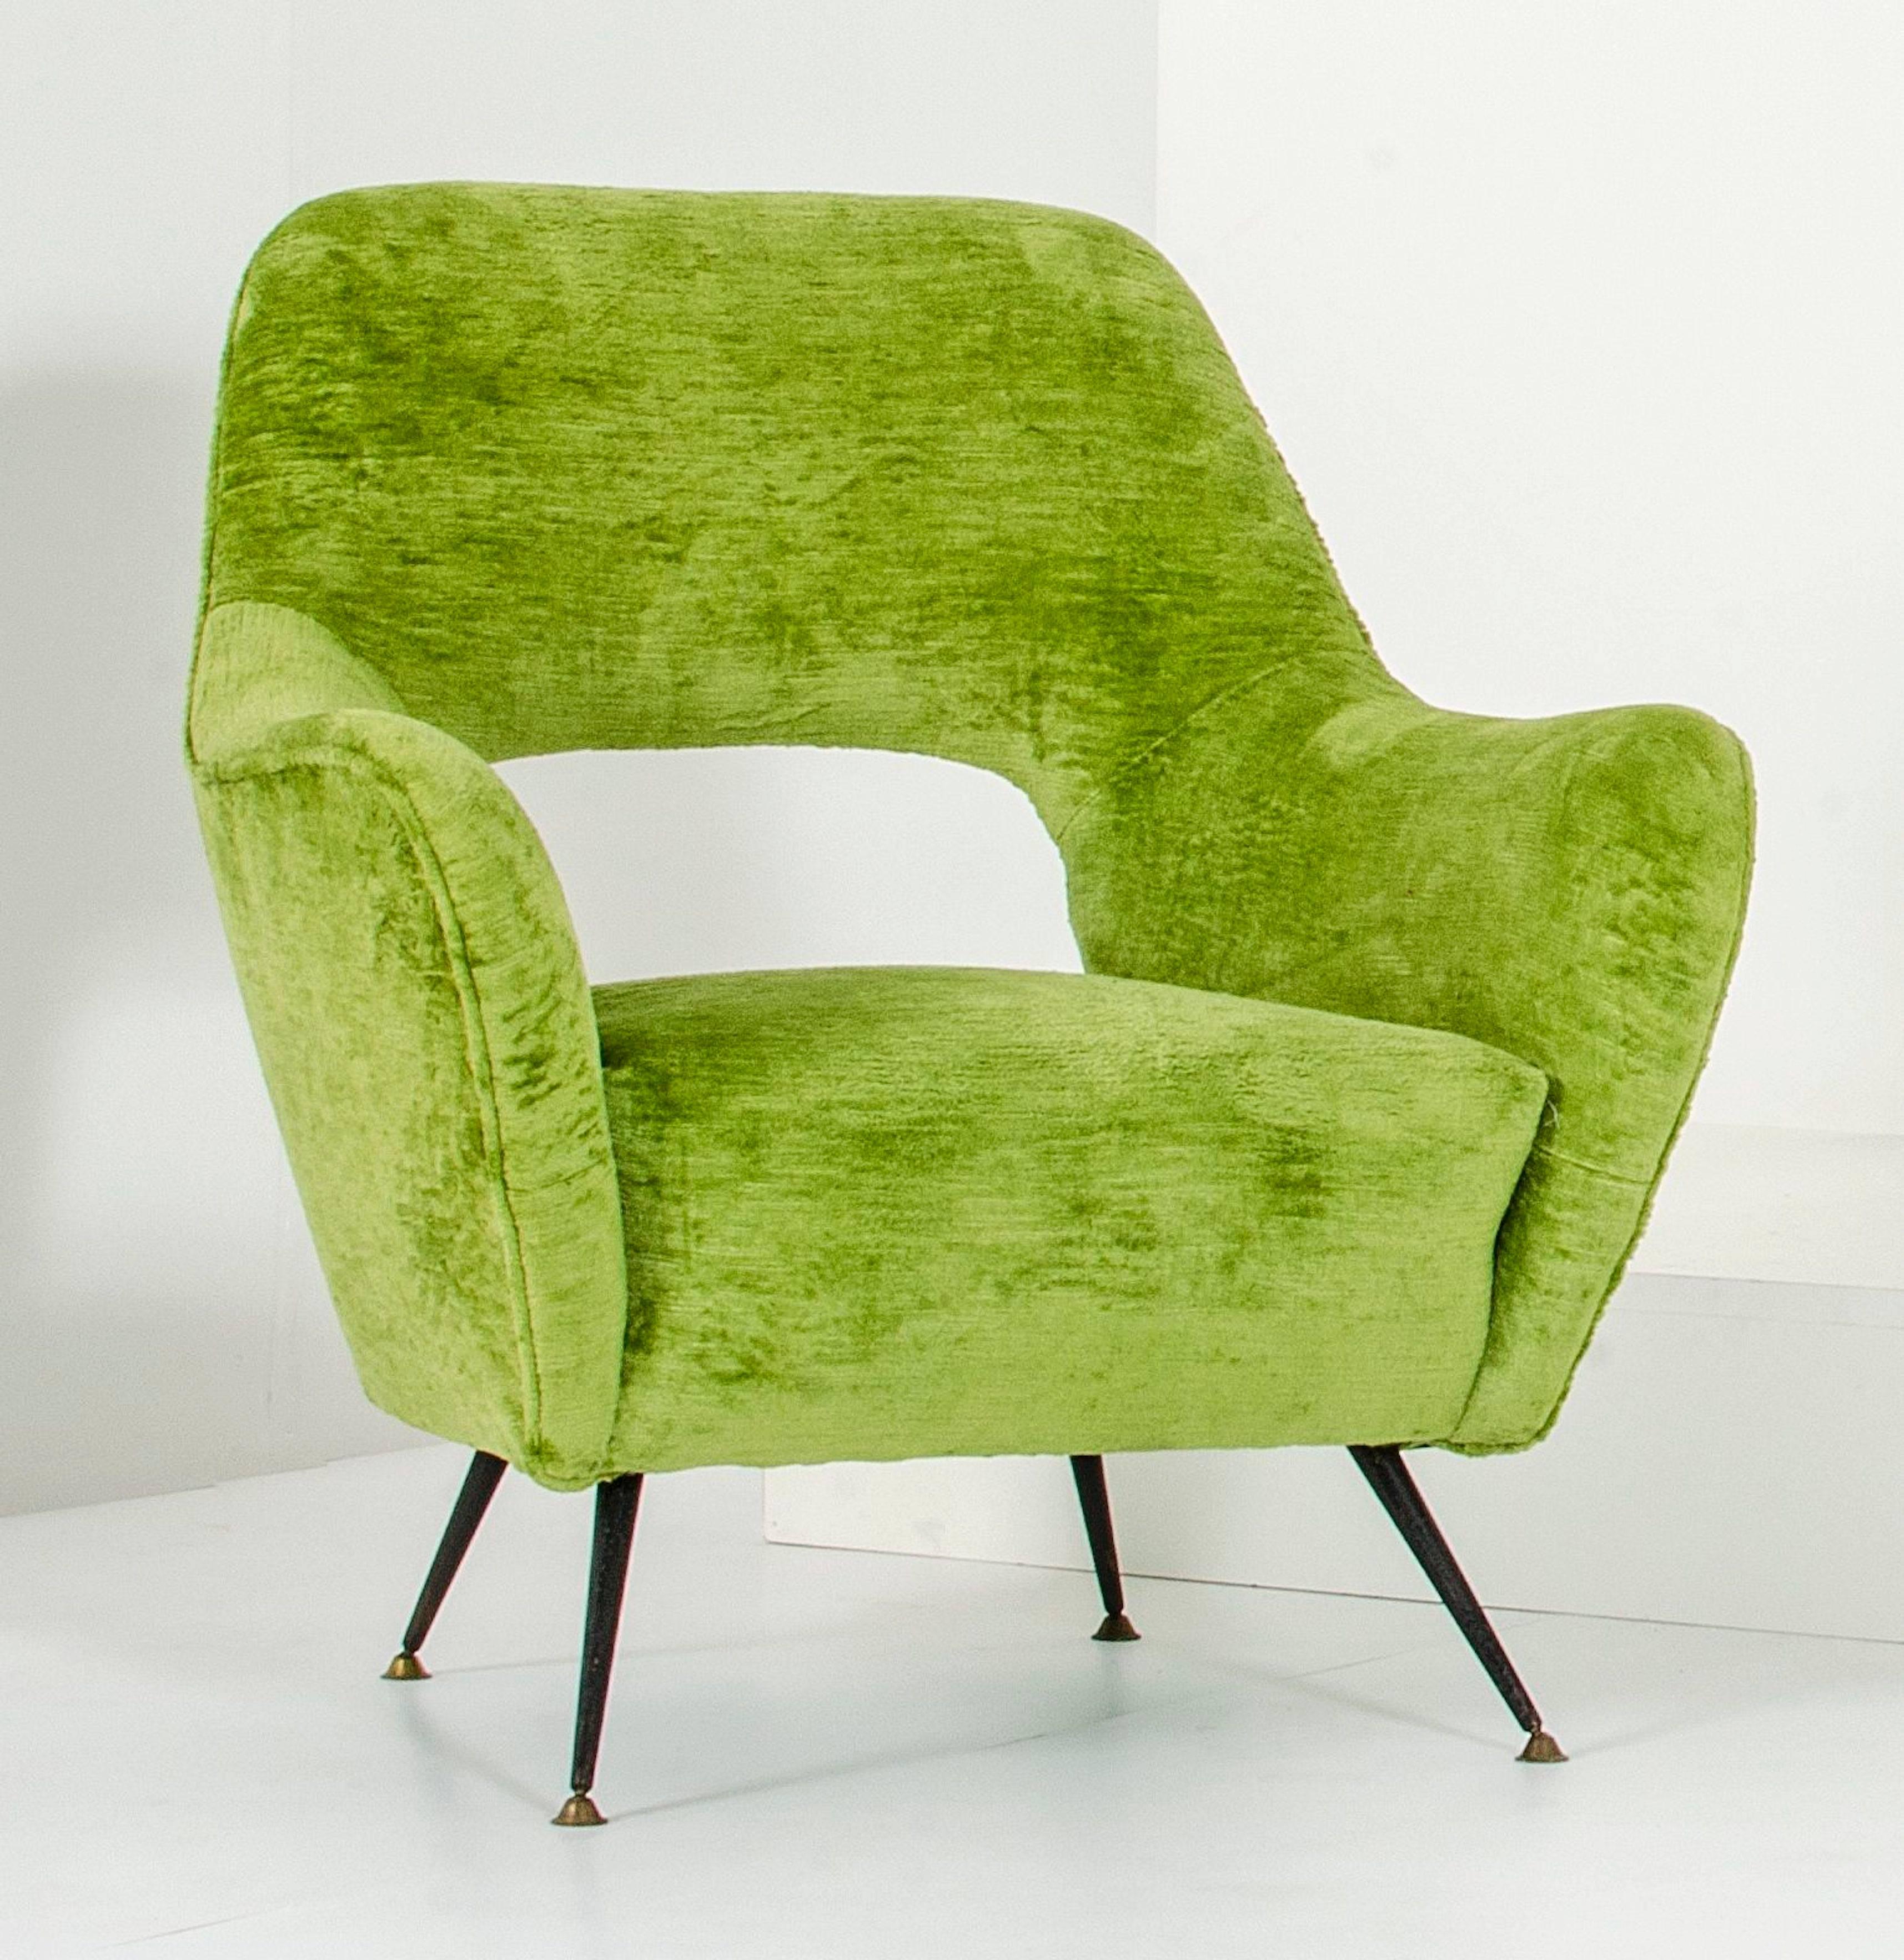 A pair of Gastone Rinaldi armchairs, upholstered in green velvet on enameled metal legs. Edited in the 1960s. Excellent condition.